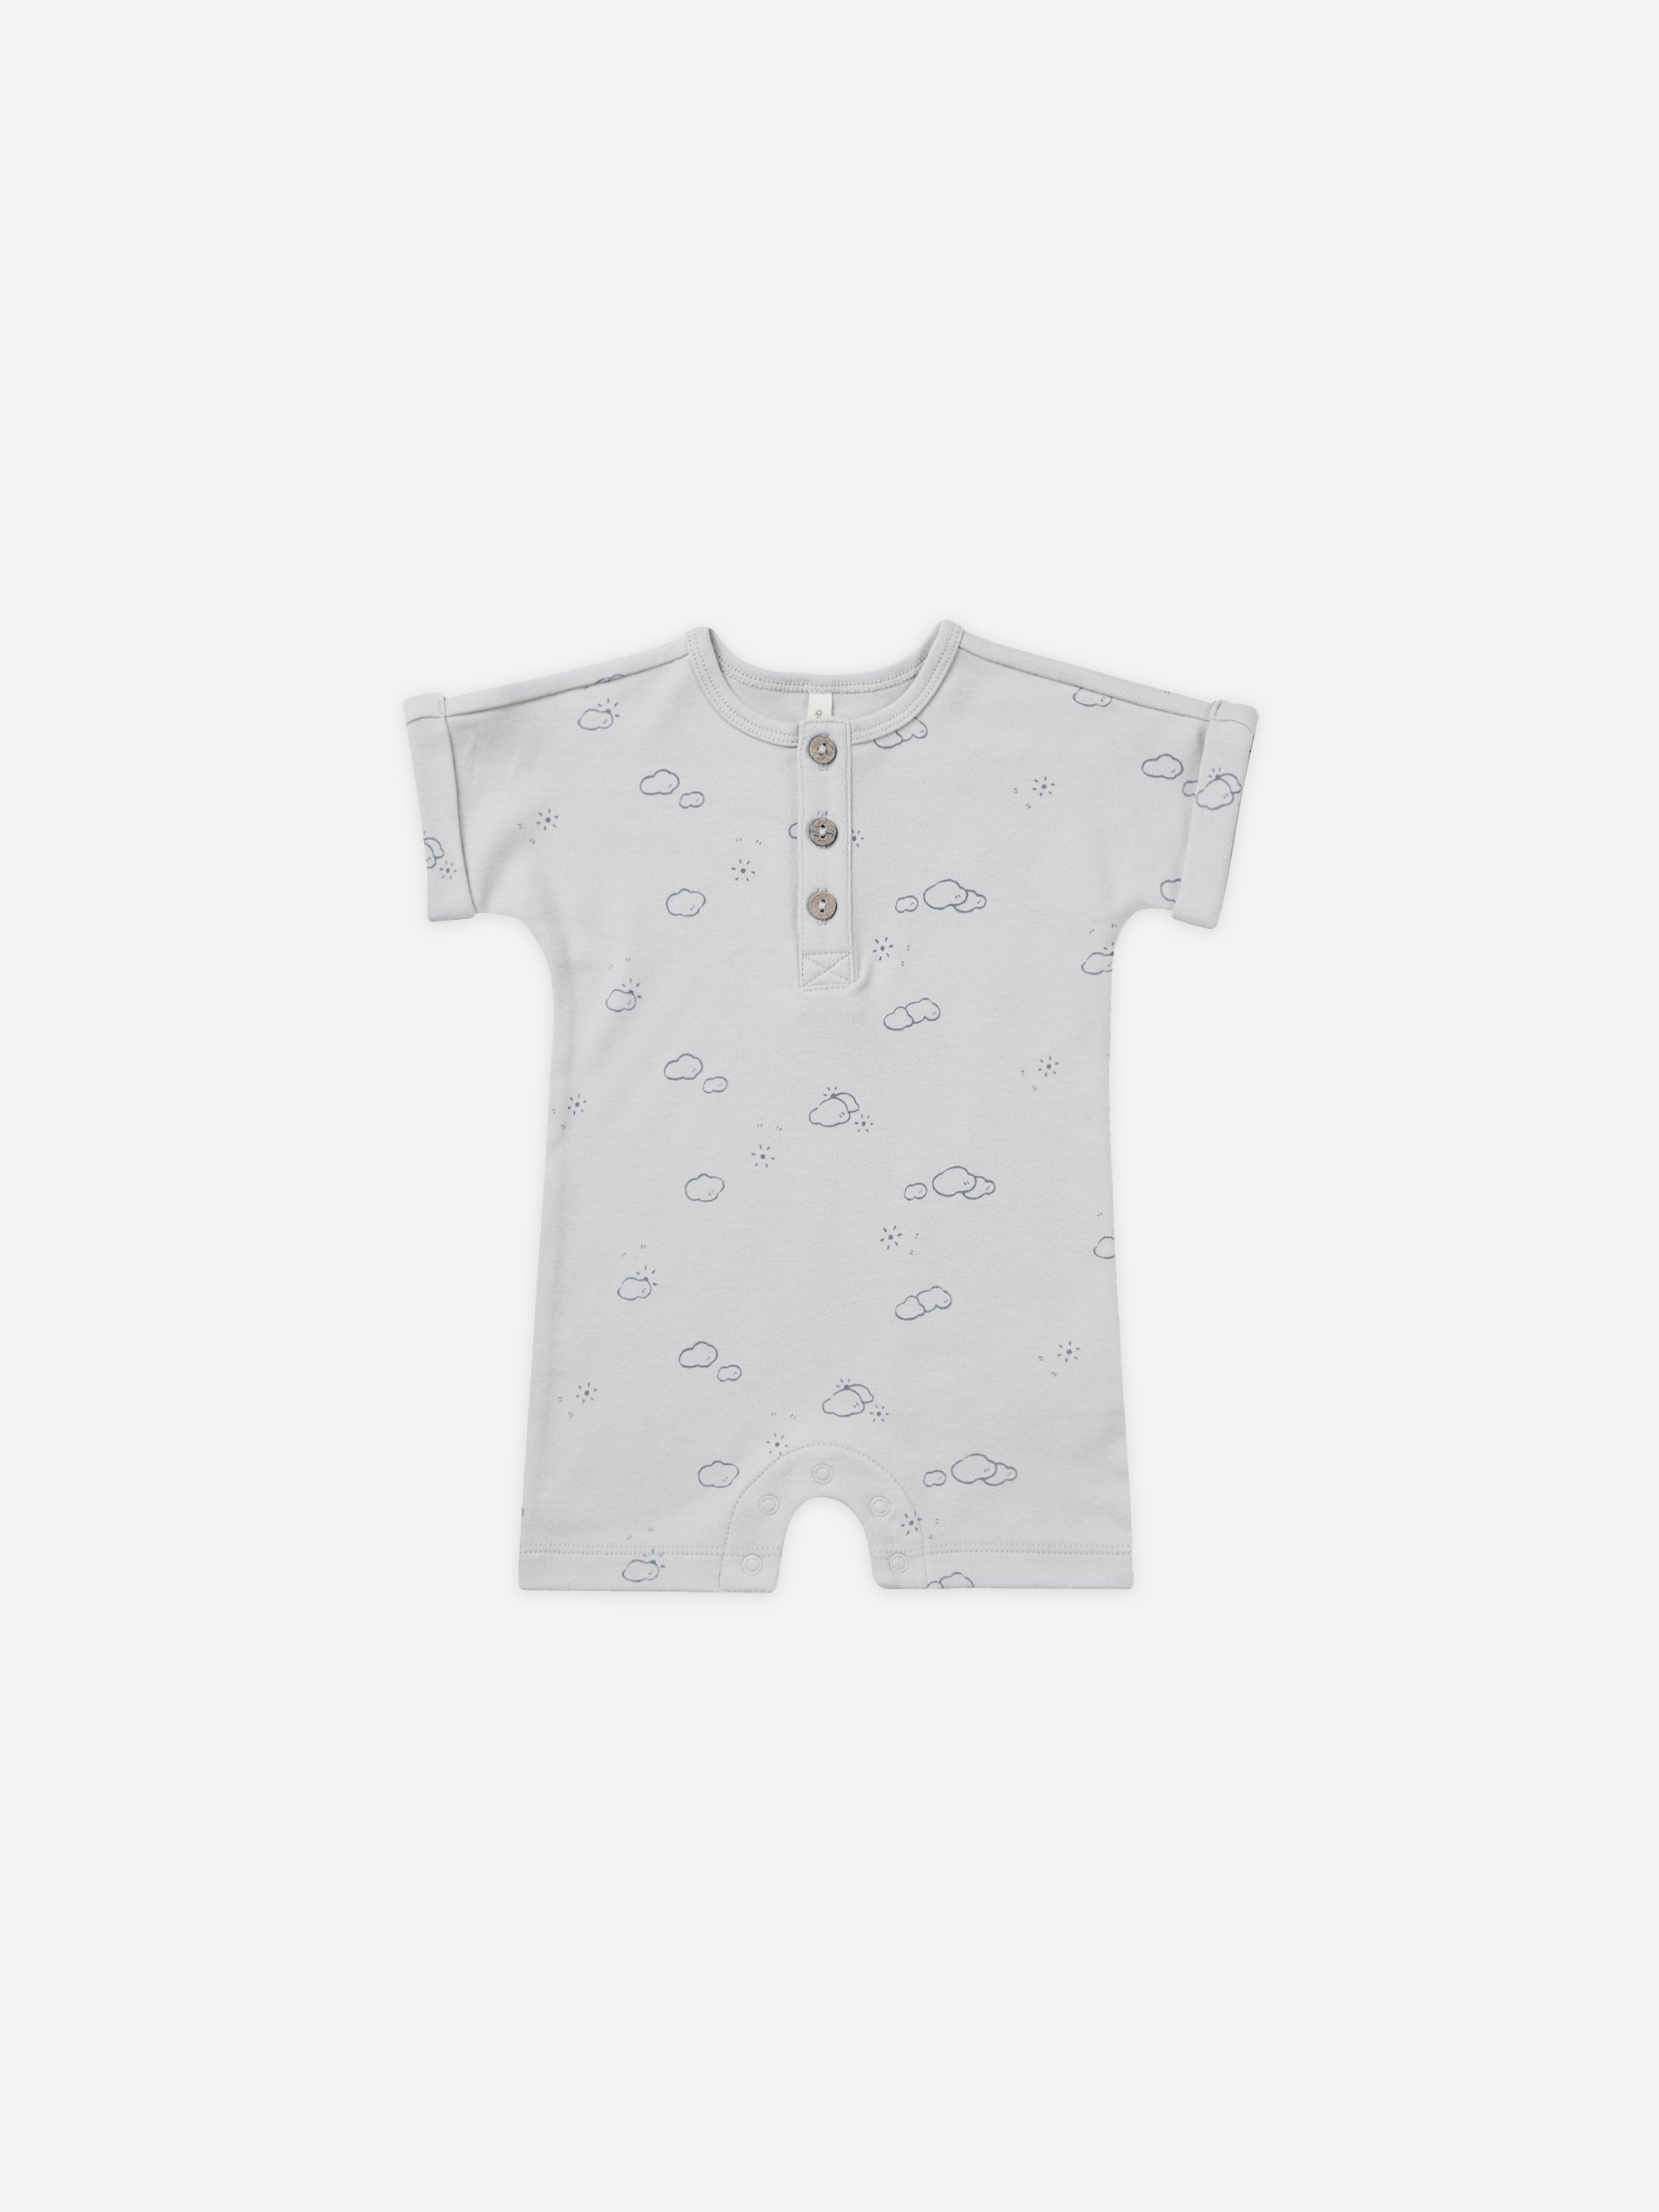 Short Sleeve One-Piece || Sunny Day - Rylee + Cru | Kids Clothes | Trendy Baby Clothes | Modern Infant Outfits |